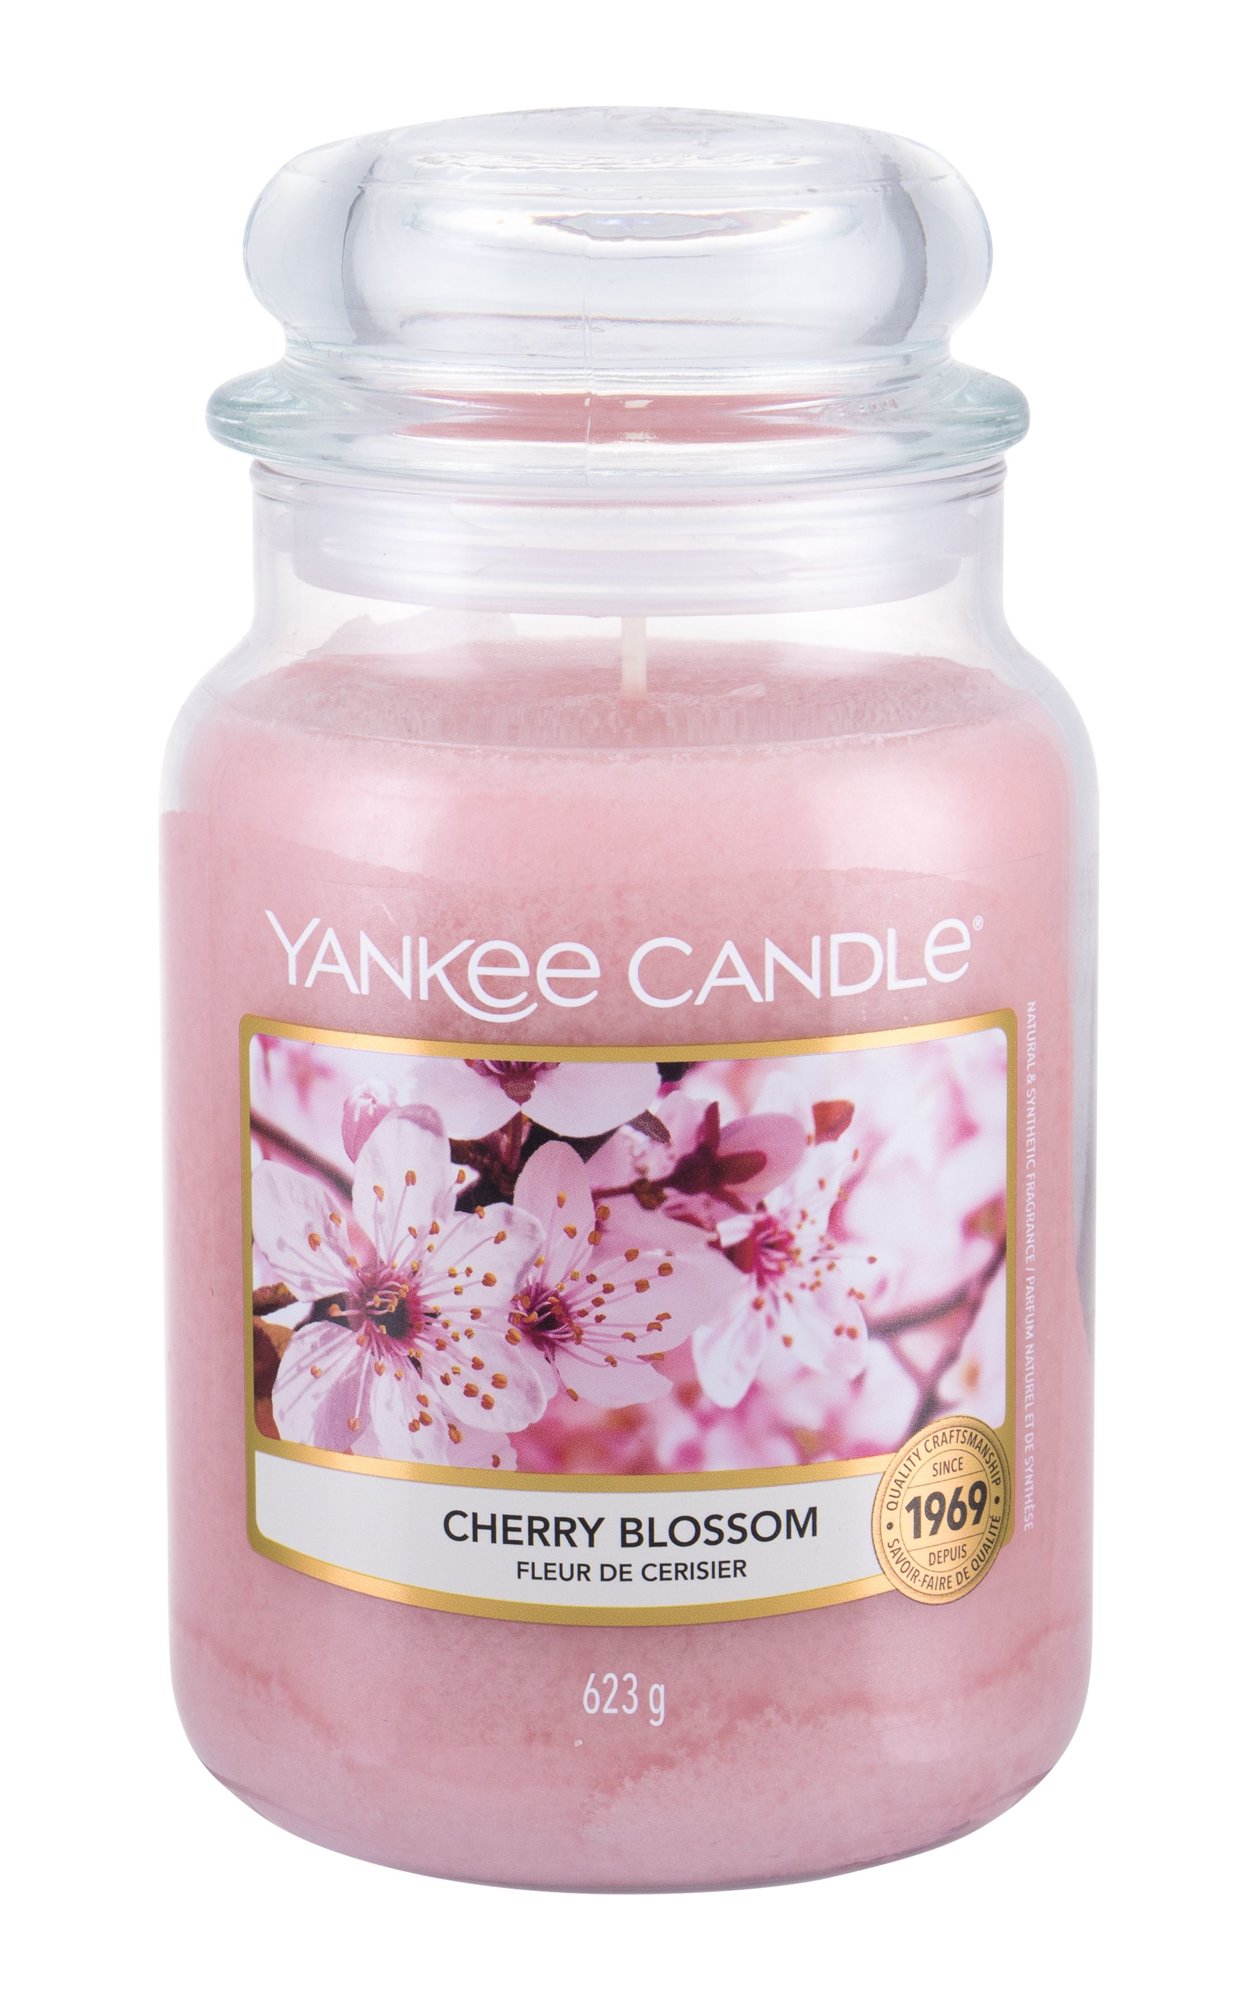 Yankee Candle Cherry Blossom 623g Kvepalai Unisex Scented Candle